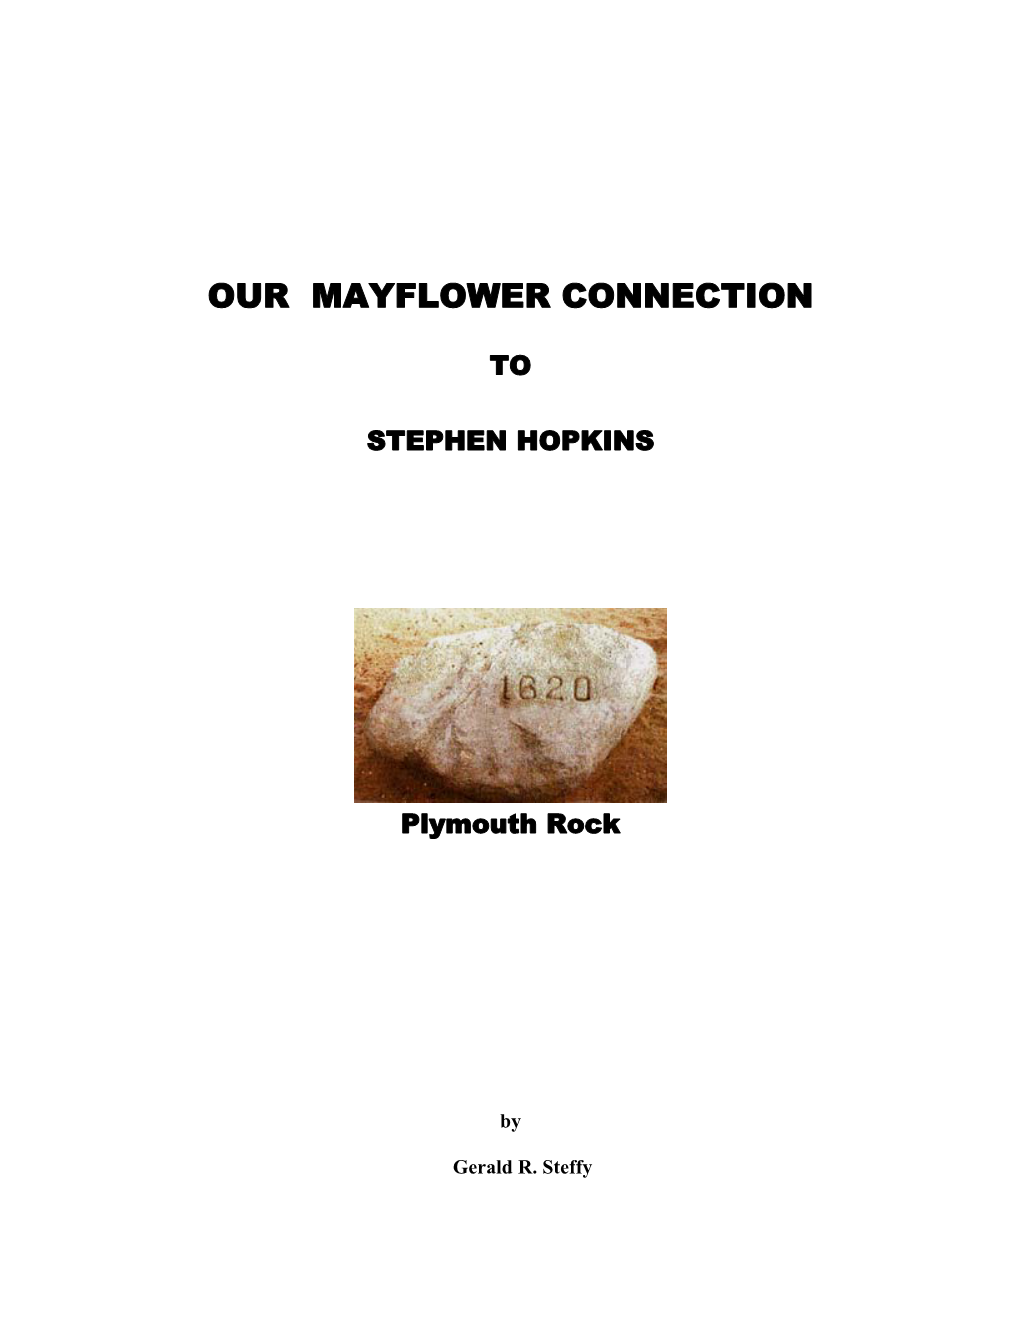 Our Mayflower Connection to Stephen Hopkins